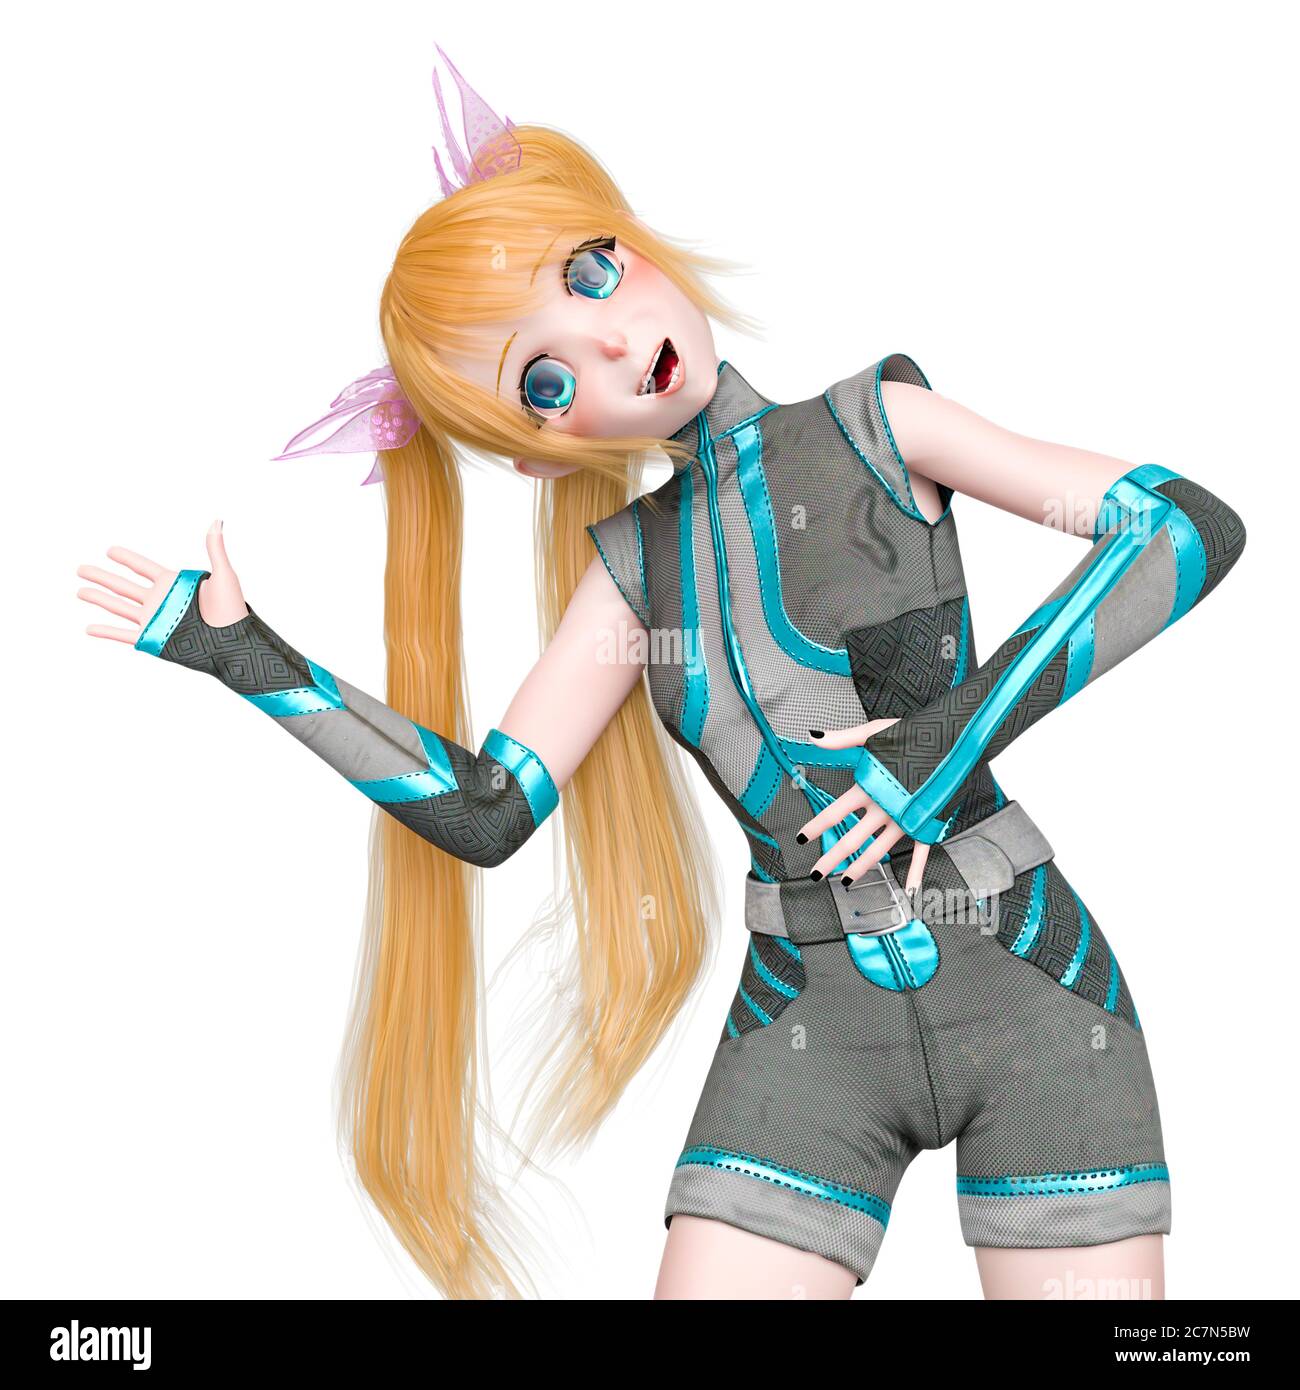 blond girl is doing a robot dance in a sporty outfit on kwaii anime style in white background, 3d illustration Stock Photo